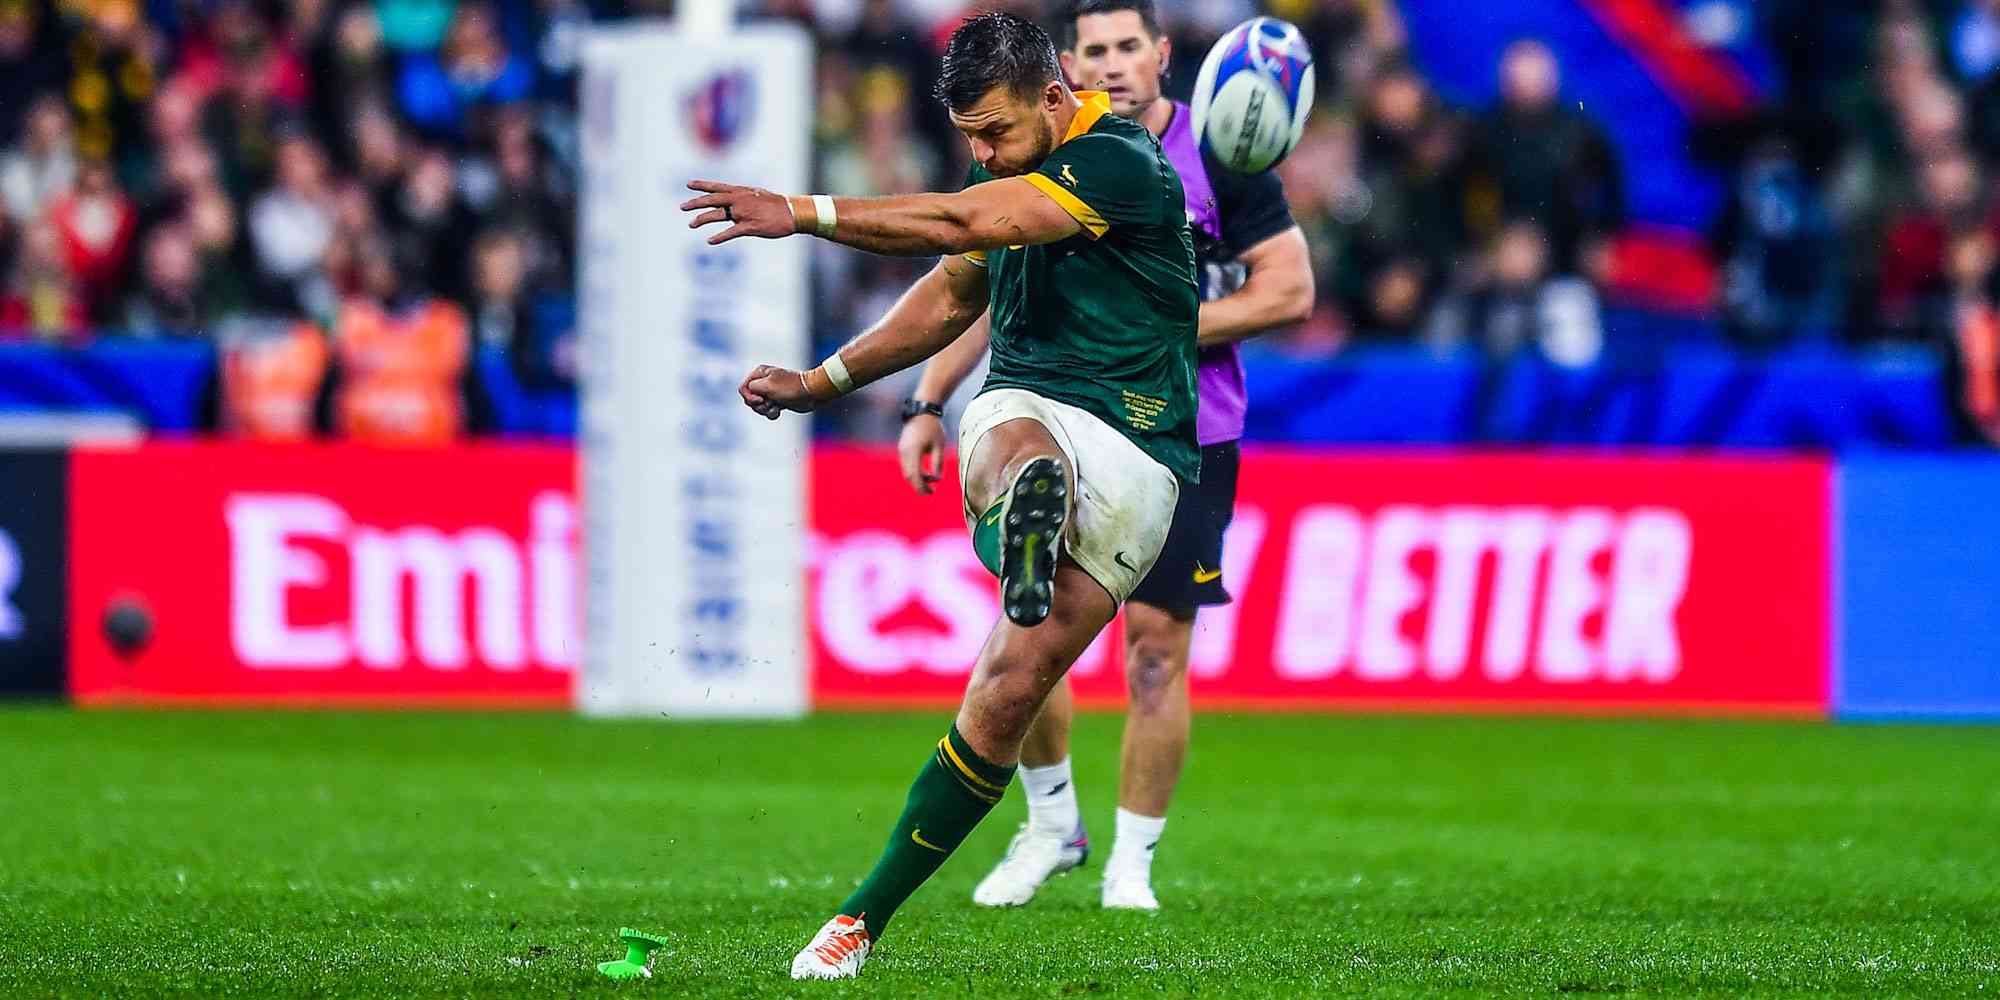 South Africa edge England to book final against New Zealand